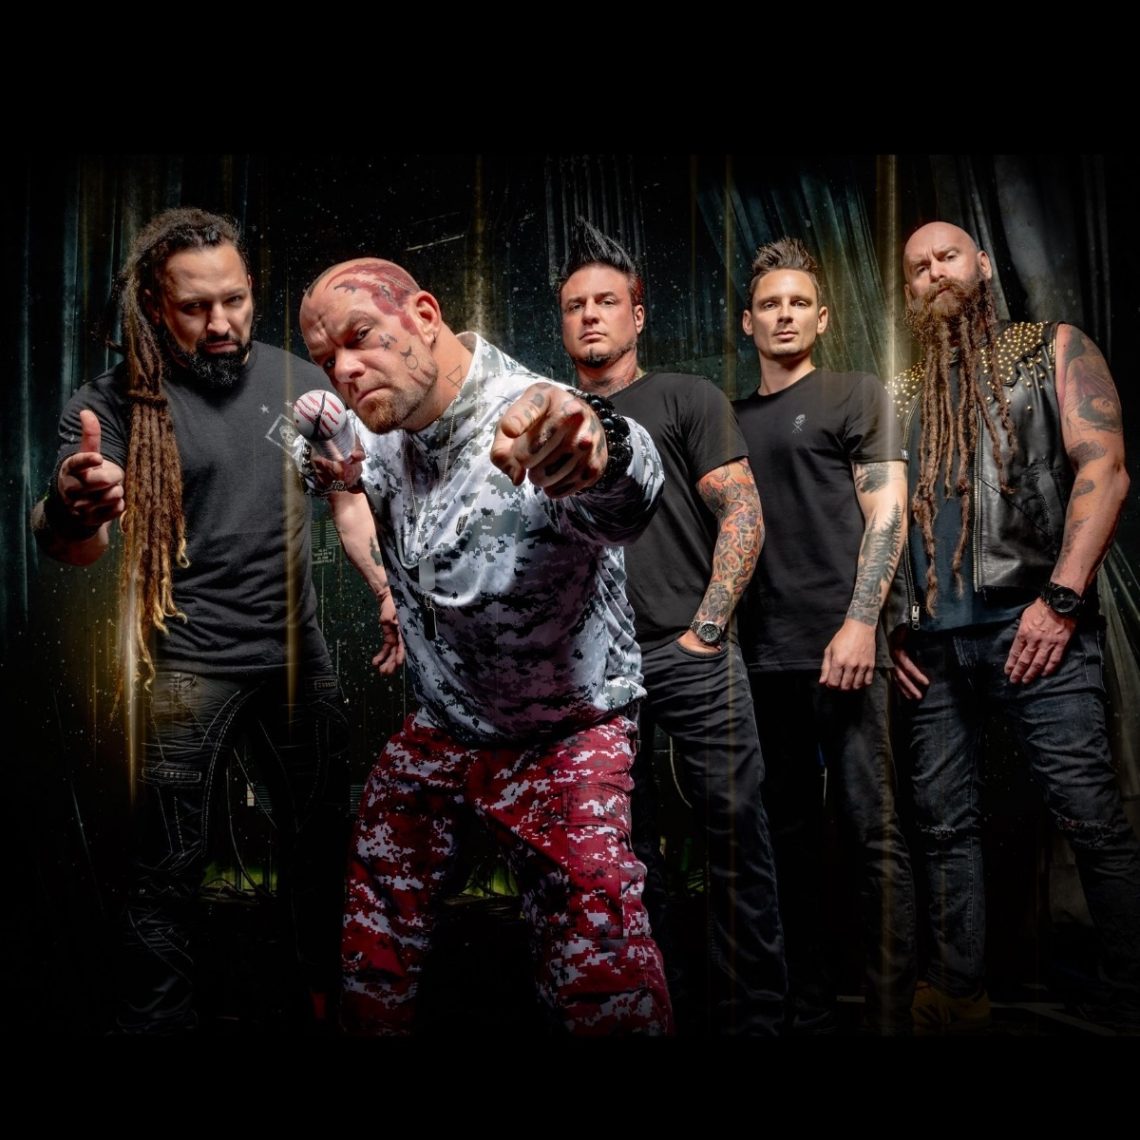 Five Finger Death Punch – Announce Winter 2020 Arena Headlining Tour of Europe with Megadeth and Bad Wolves Support